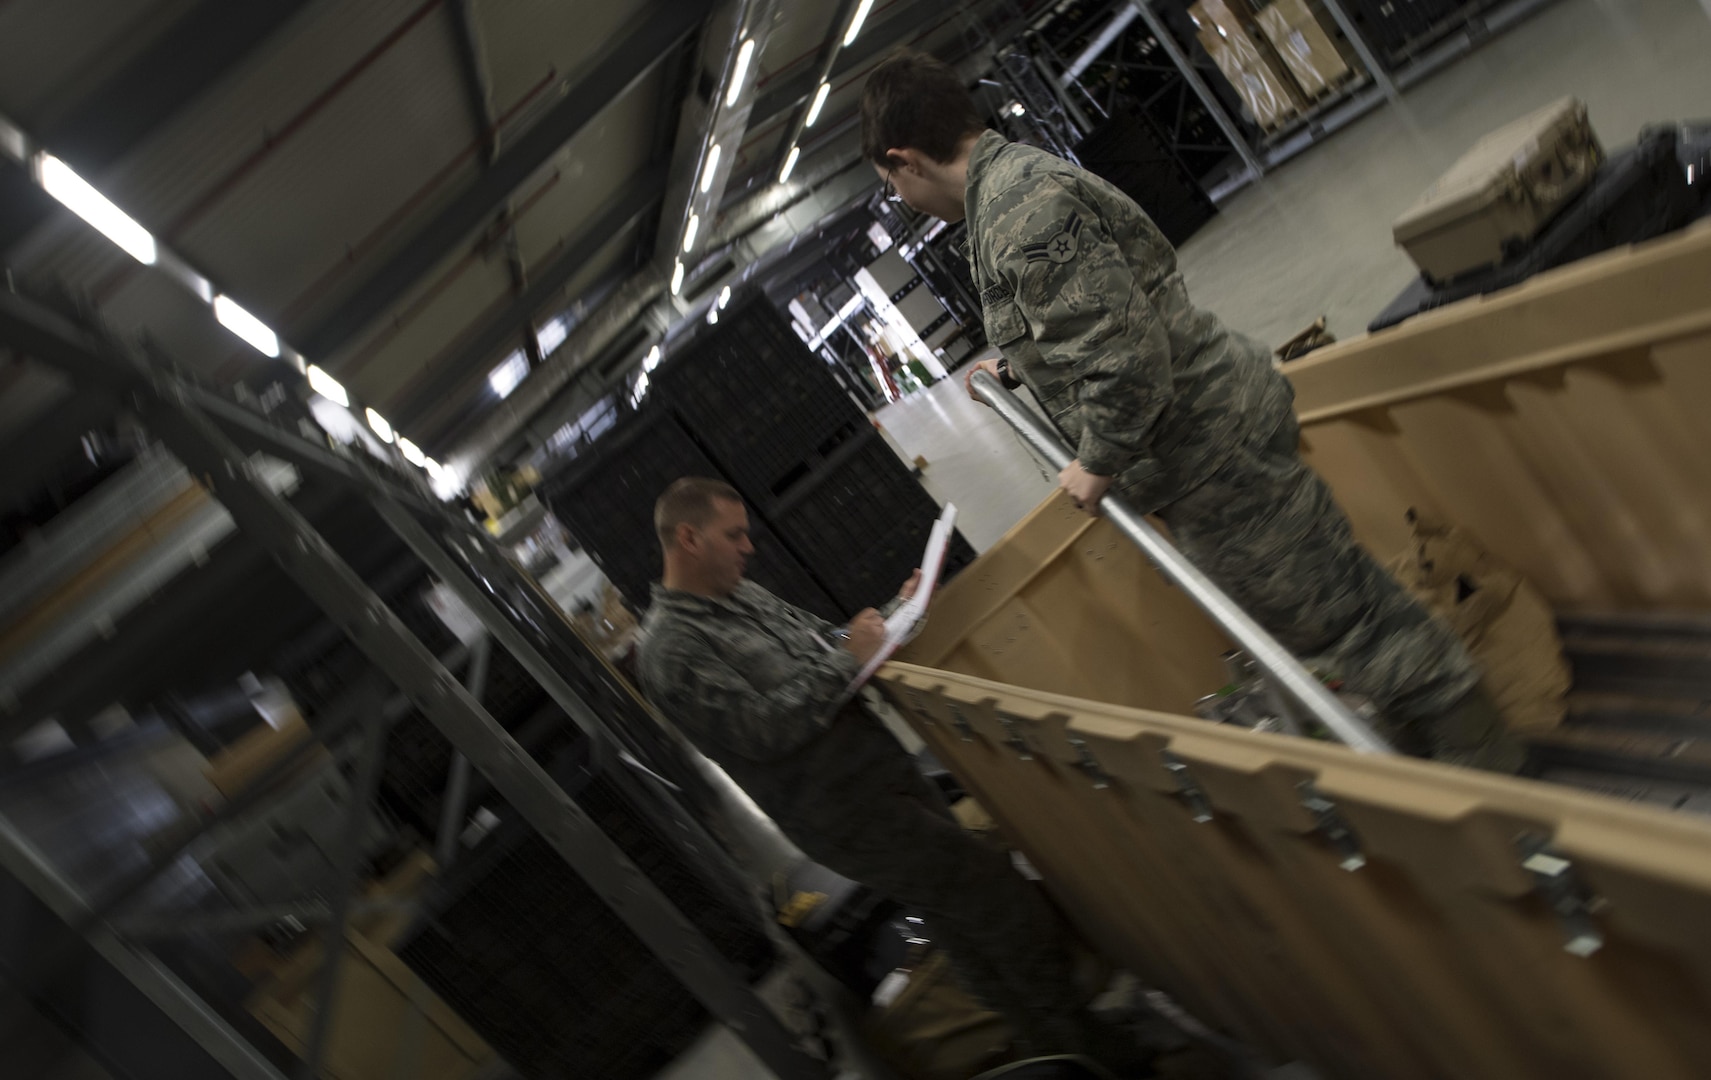 U.S. Air Force Staff Sgt. Christopher Ryde, 86th Medical Support Squadron war reserve material supervisor, and U.S. Air Force Airman 1st Class Breanna Jannarone, 86th MDSS medical logistician, take inventory of medical equipment on Ramstein Air Base, Germany, Sept. 7, 2017. Ryde, Jannarone, and their coworkers conduct a full inventory of every piece of medical supplies and equipment stored in the 86th MDSS’ three warehouses every two years. (U.S. Air Force photo by Senior Airman Tryphena Mayhugh)